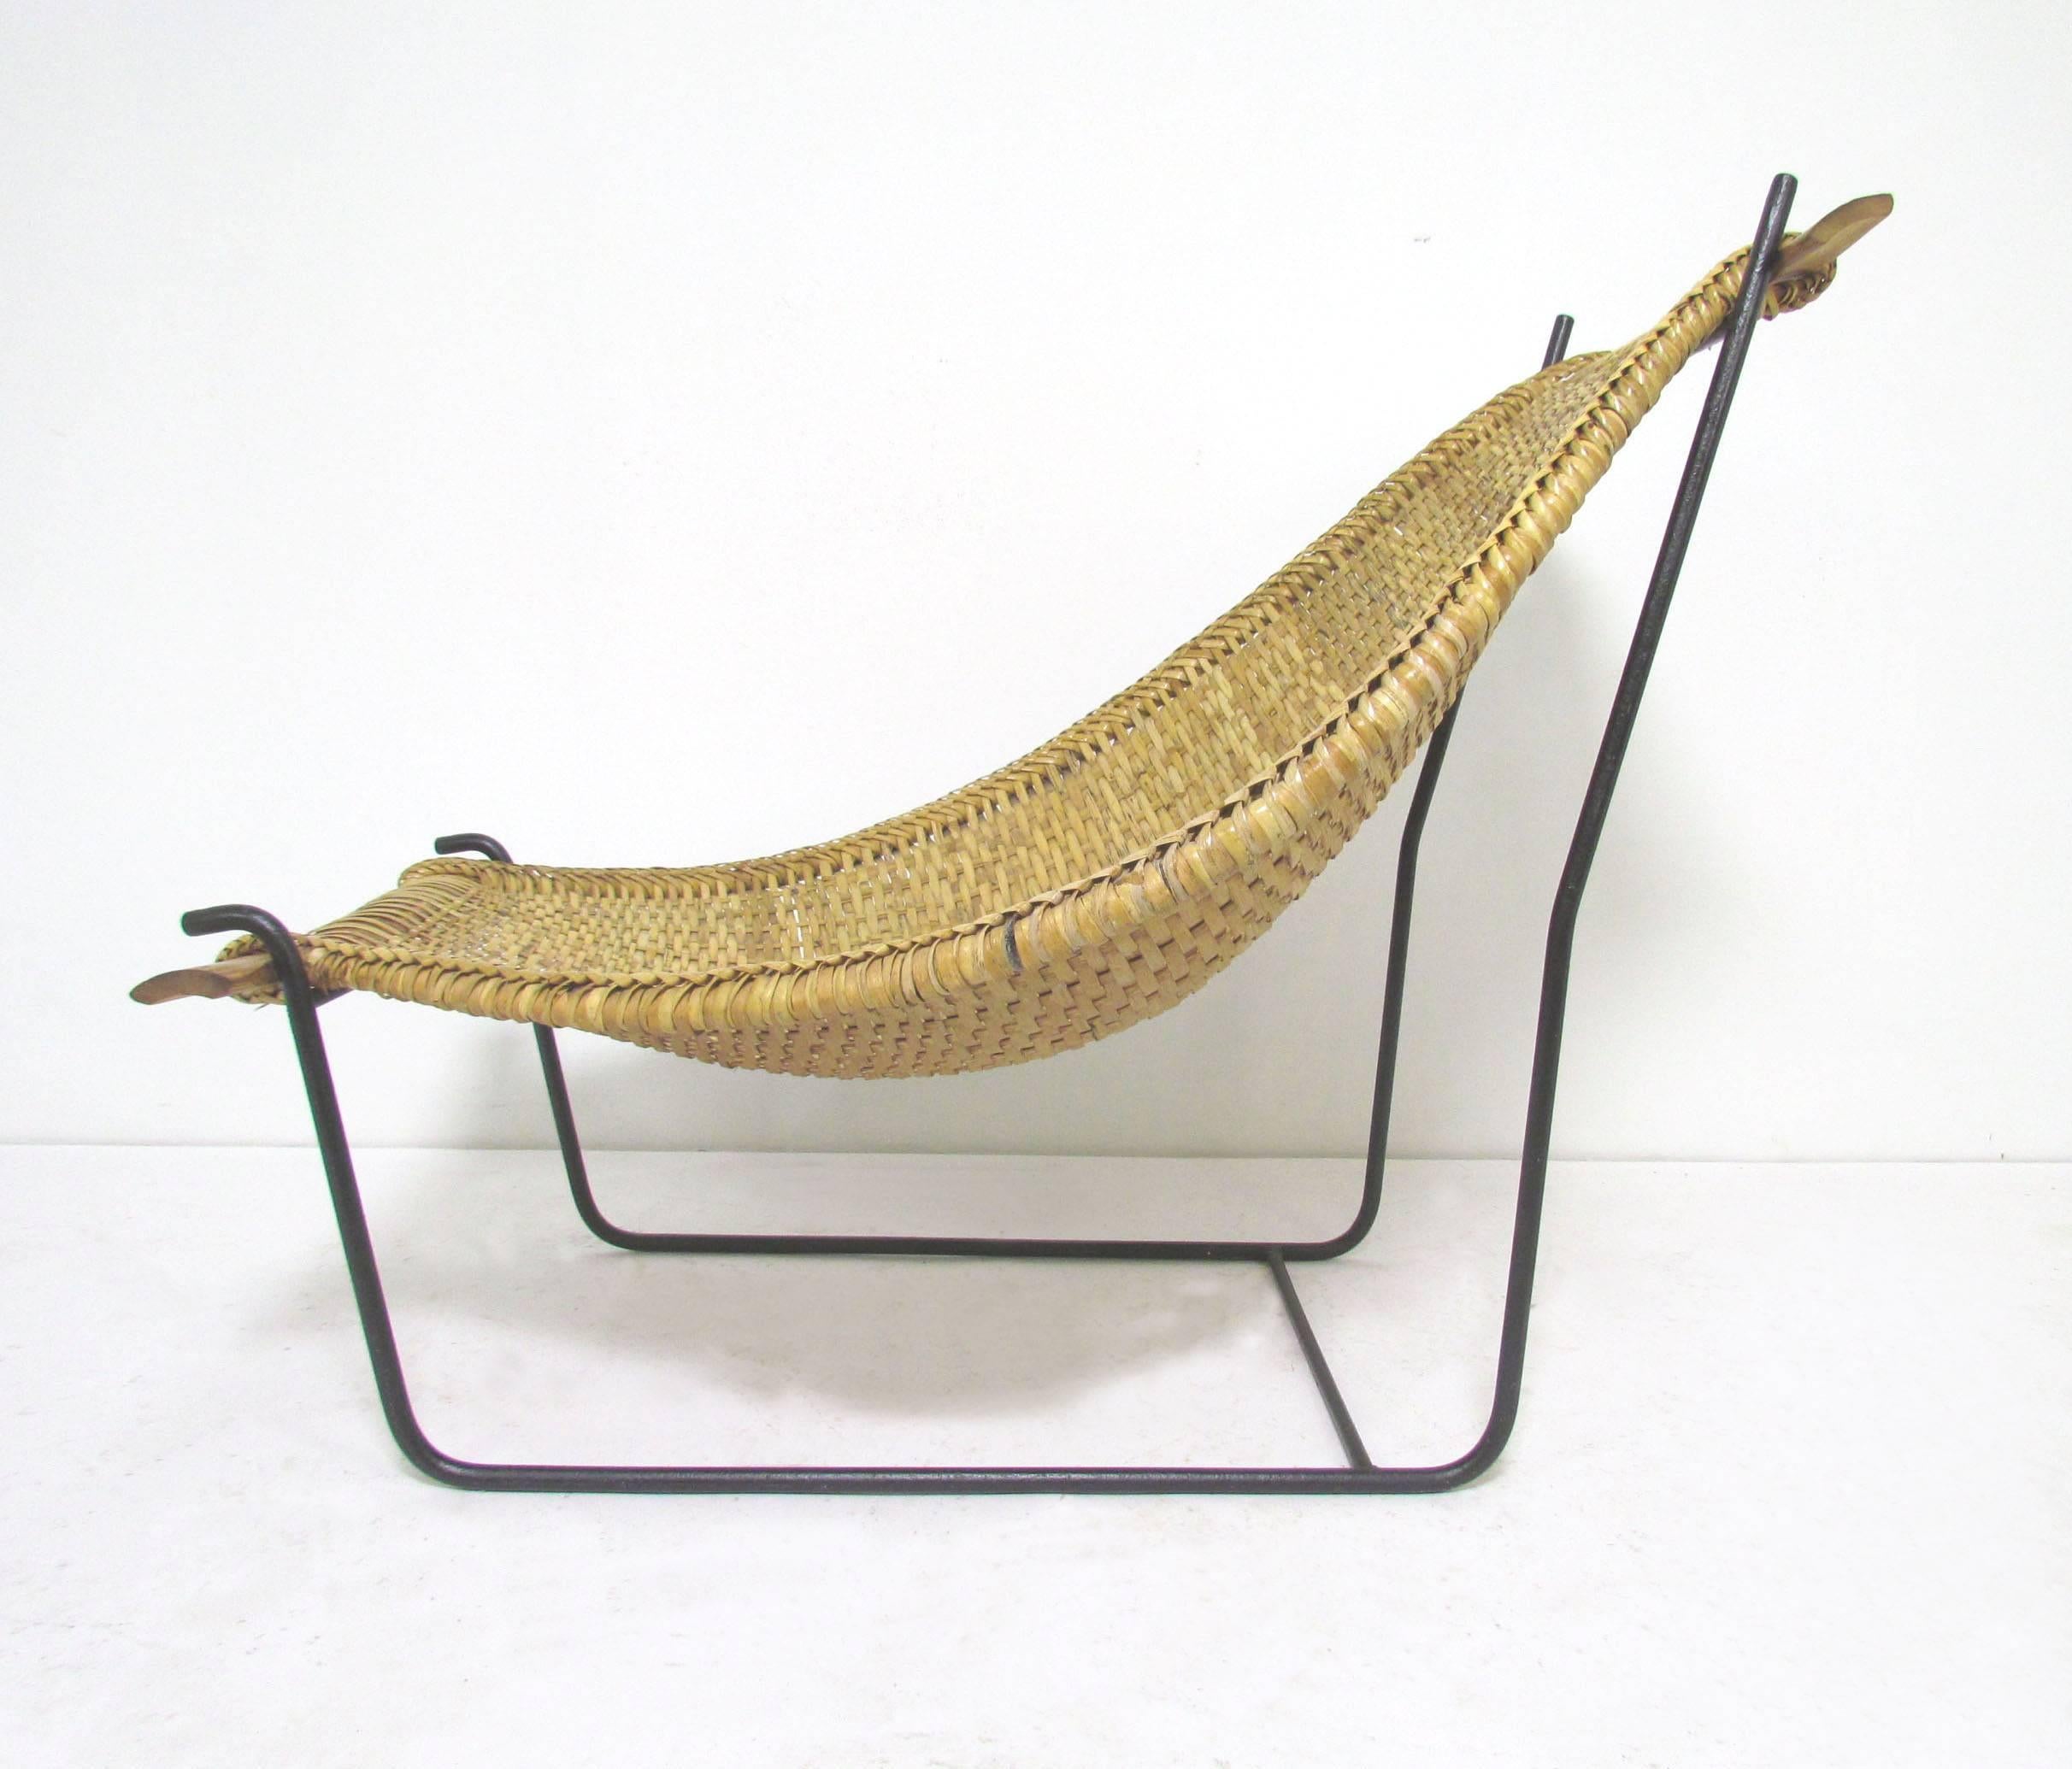 Hammock-form curvaceous sling chair in woven rattan on a wrought iron base, in the manner of John Risley's "Duyan" chair, circa 1950s.